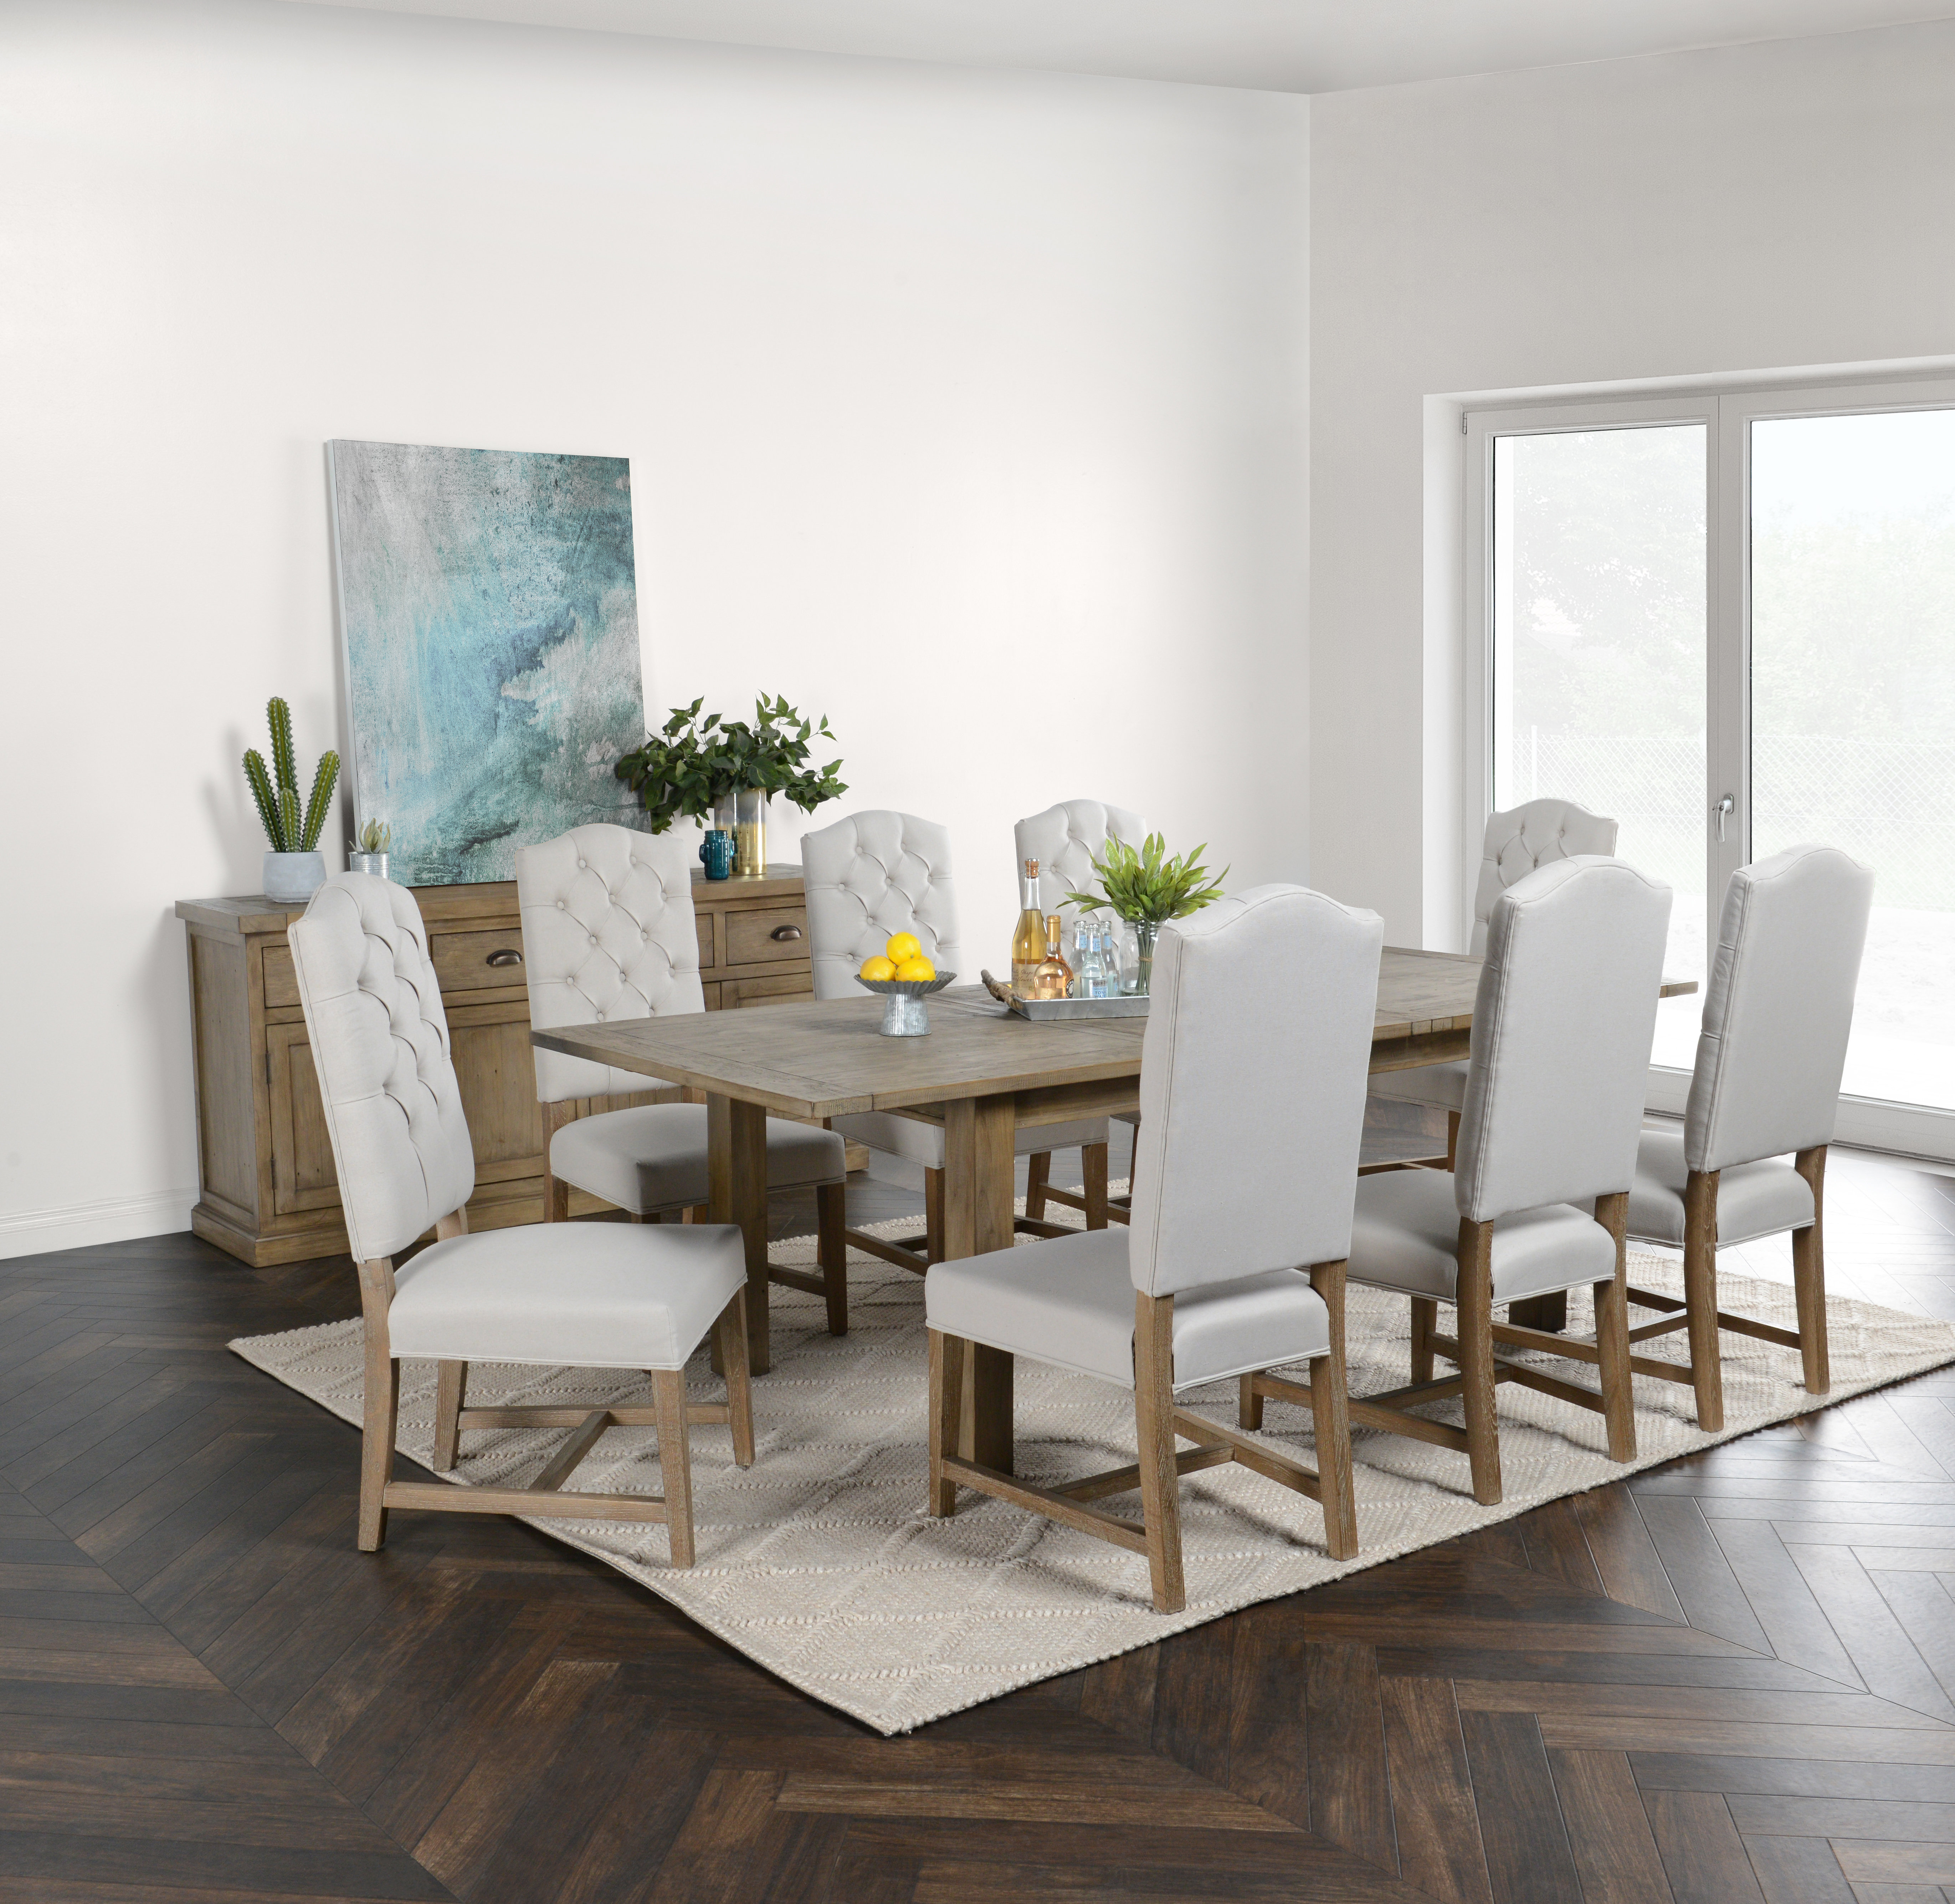 Egremt Driftwood Extendable Solid Wood Dining Table Reviews Joss Main